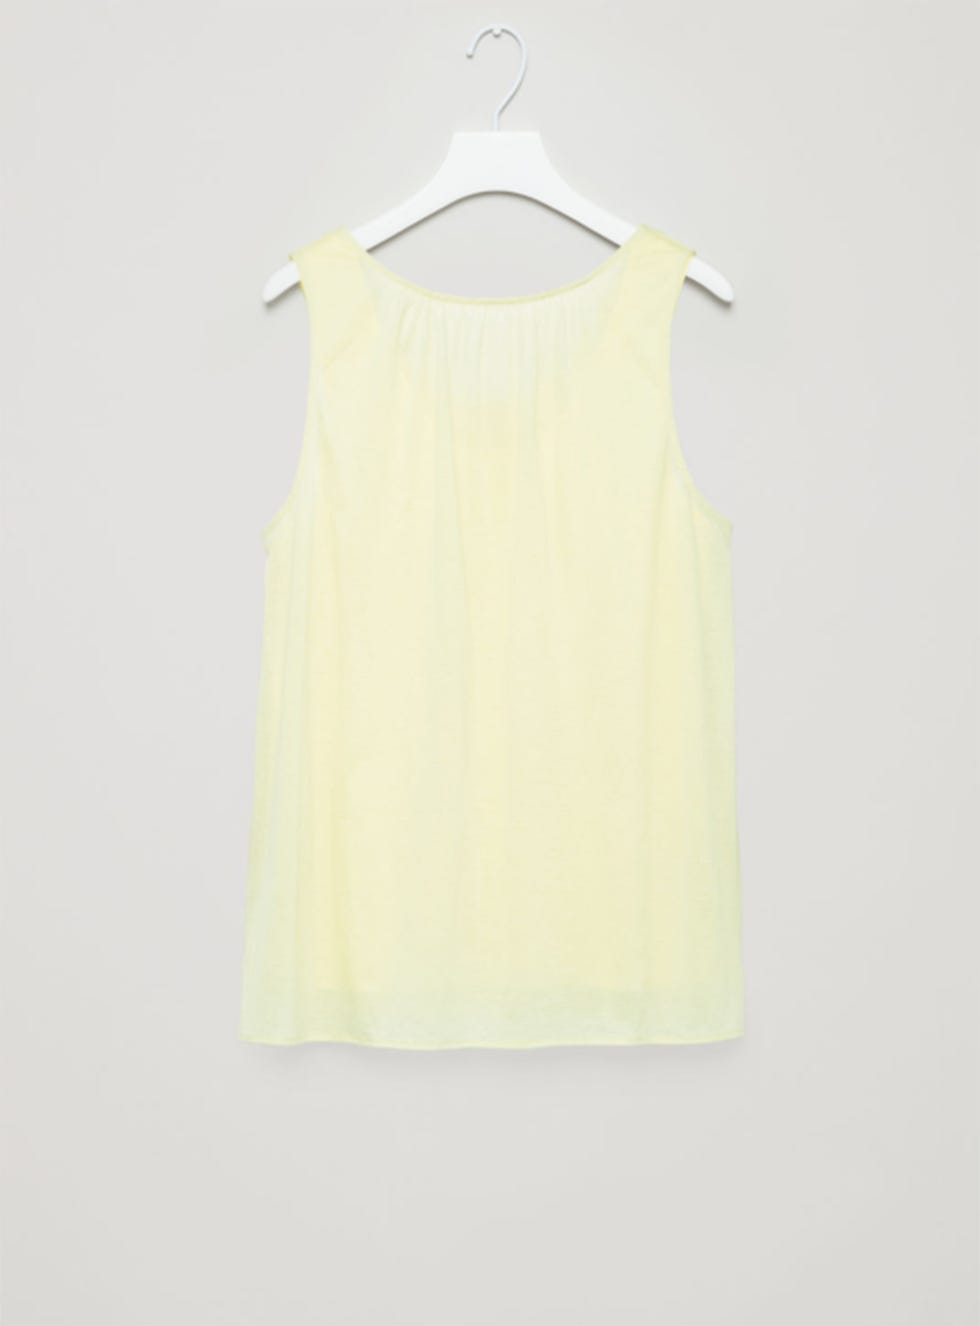 Clothing, White, Yellow, Dress, Sleeveless shirt, camisoles, Outerwear, Sleeve, Blouse, Clothes hanger, 